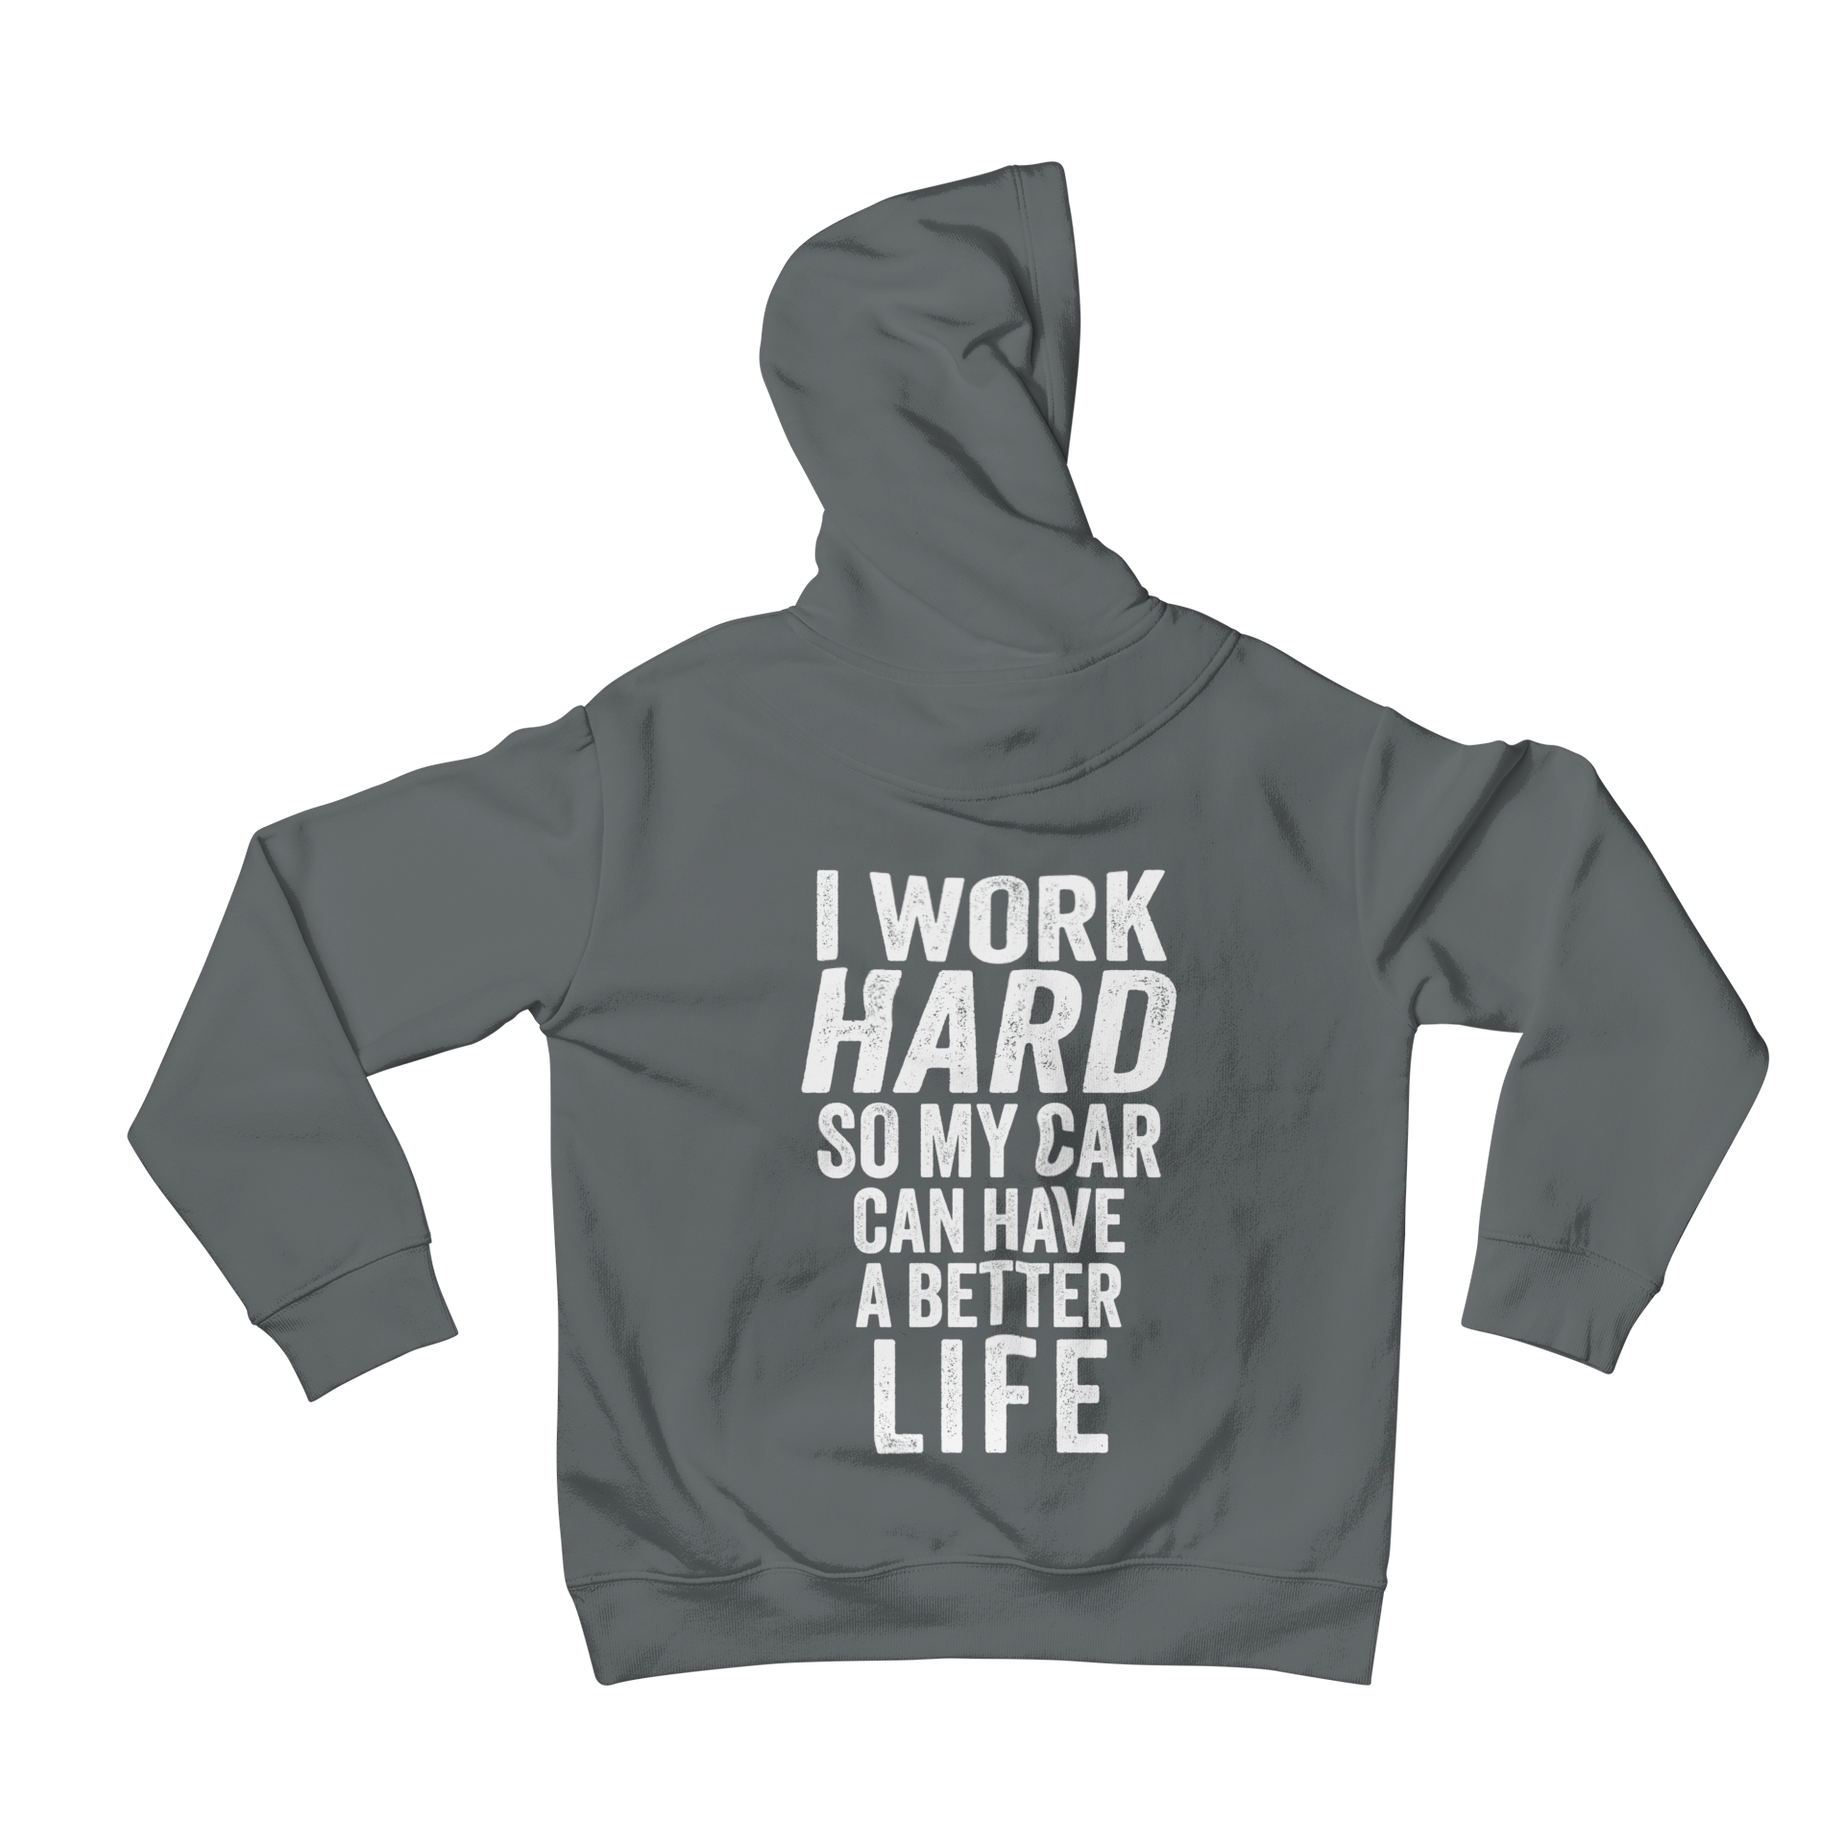 This BACK PRINT SLOGAN HOODIE shows off your hard-working attitude with the playful slogan 'I WORK HARD SO MY CAR CAN HAVE A BETTER LIFE.' Stay comfortable and stylish while showing off your quirky sense of humor. Perfect for any casual occasion.